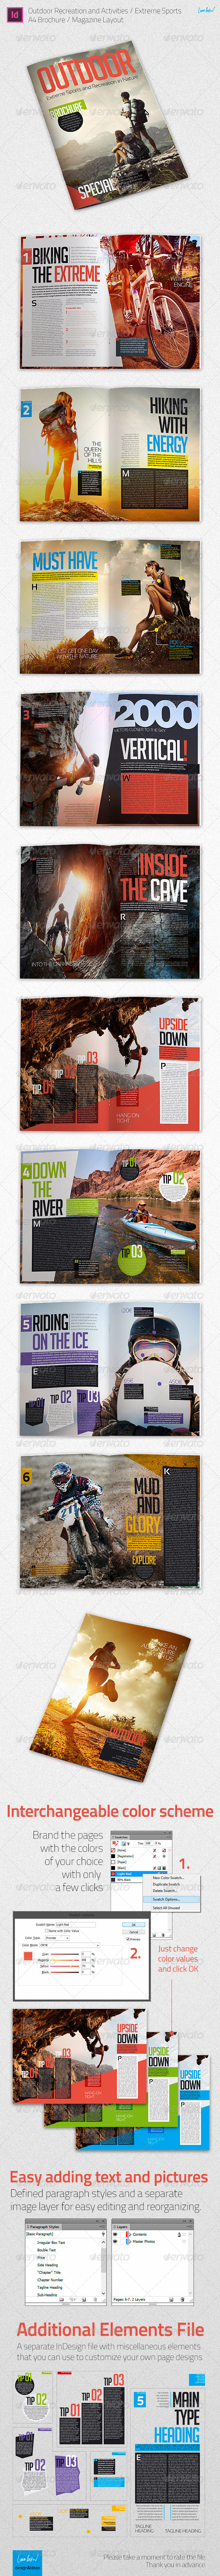 Outdoor Recreation / Extreme Sports - A4 Brochure